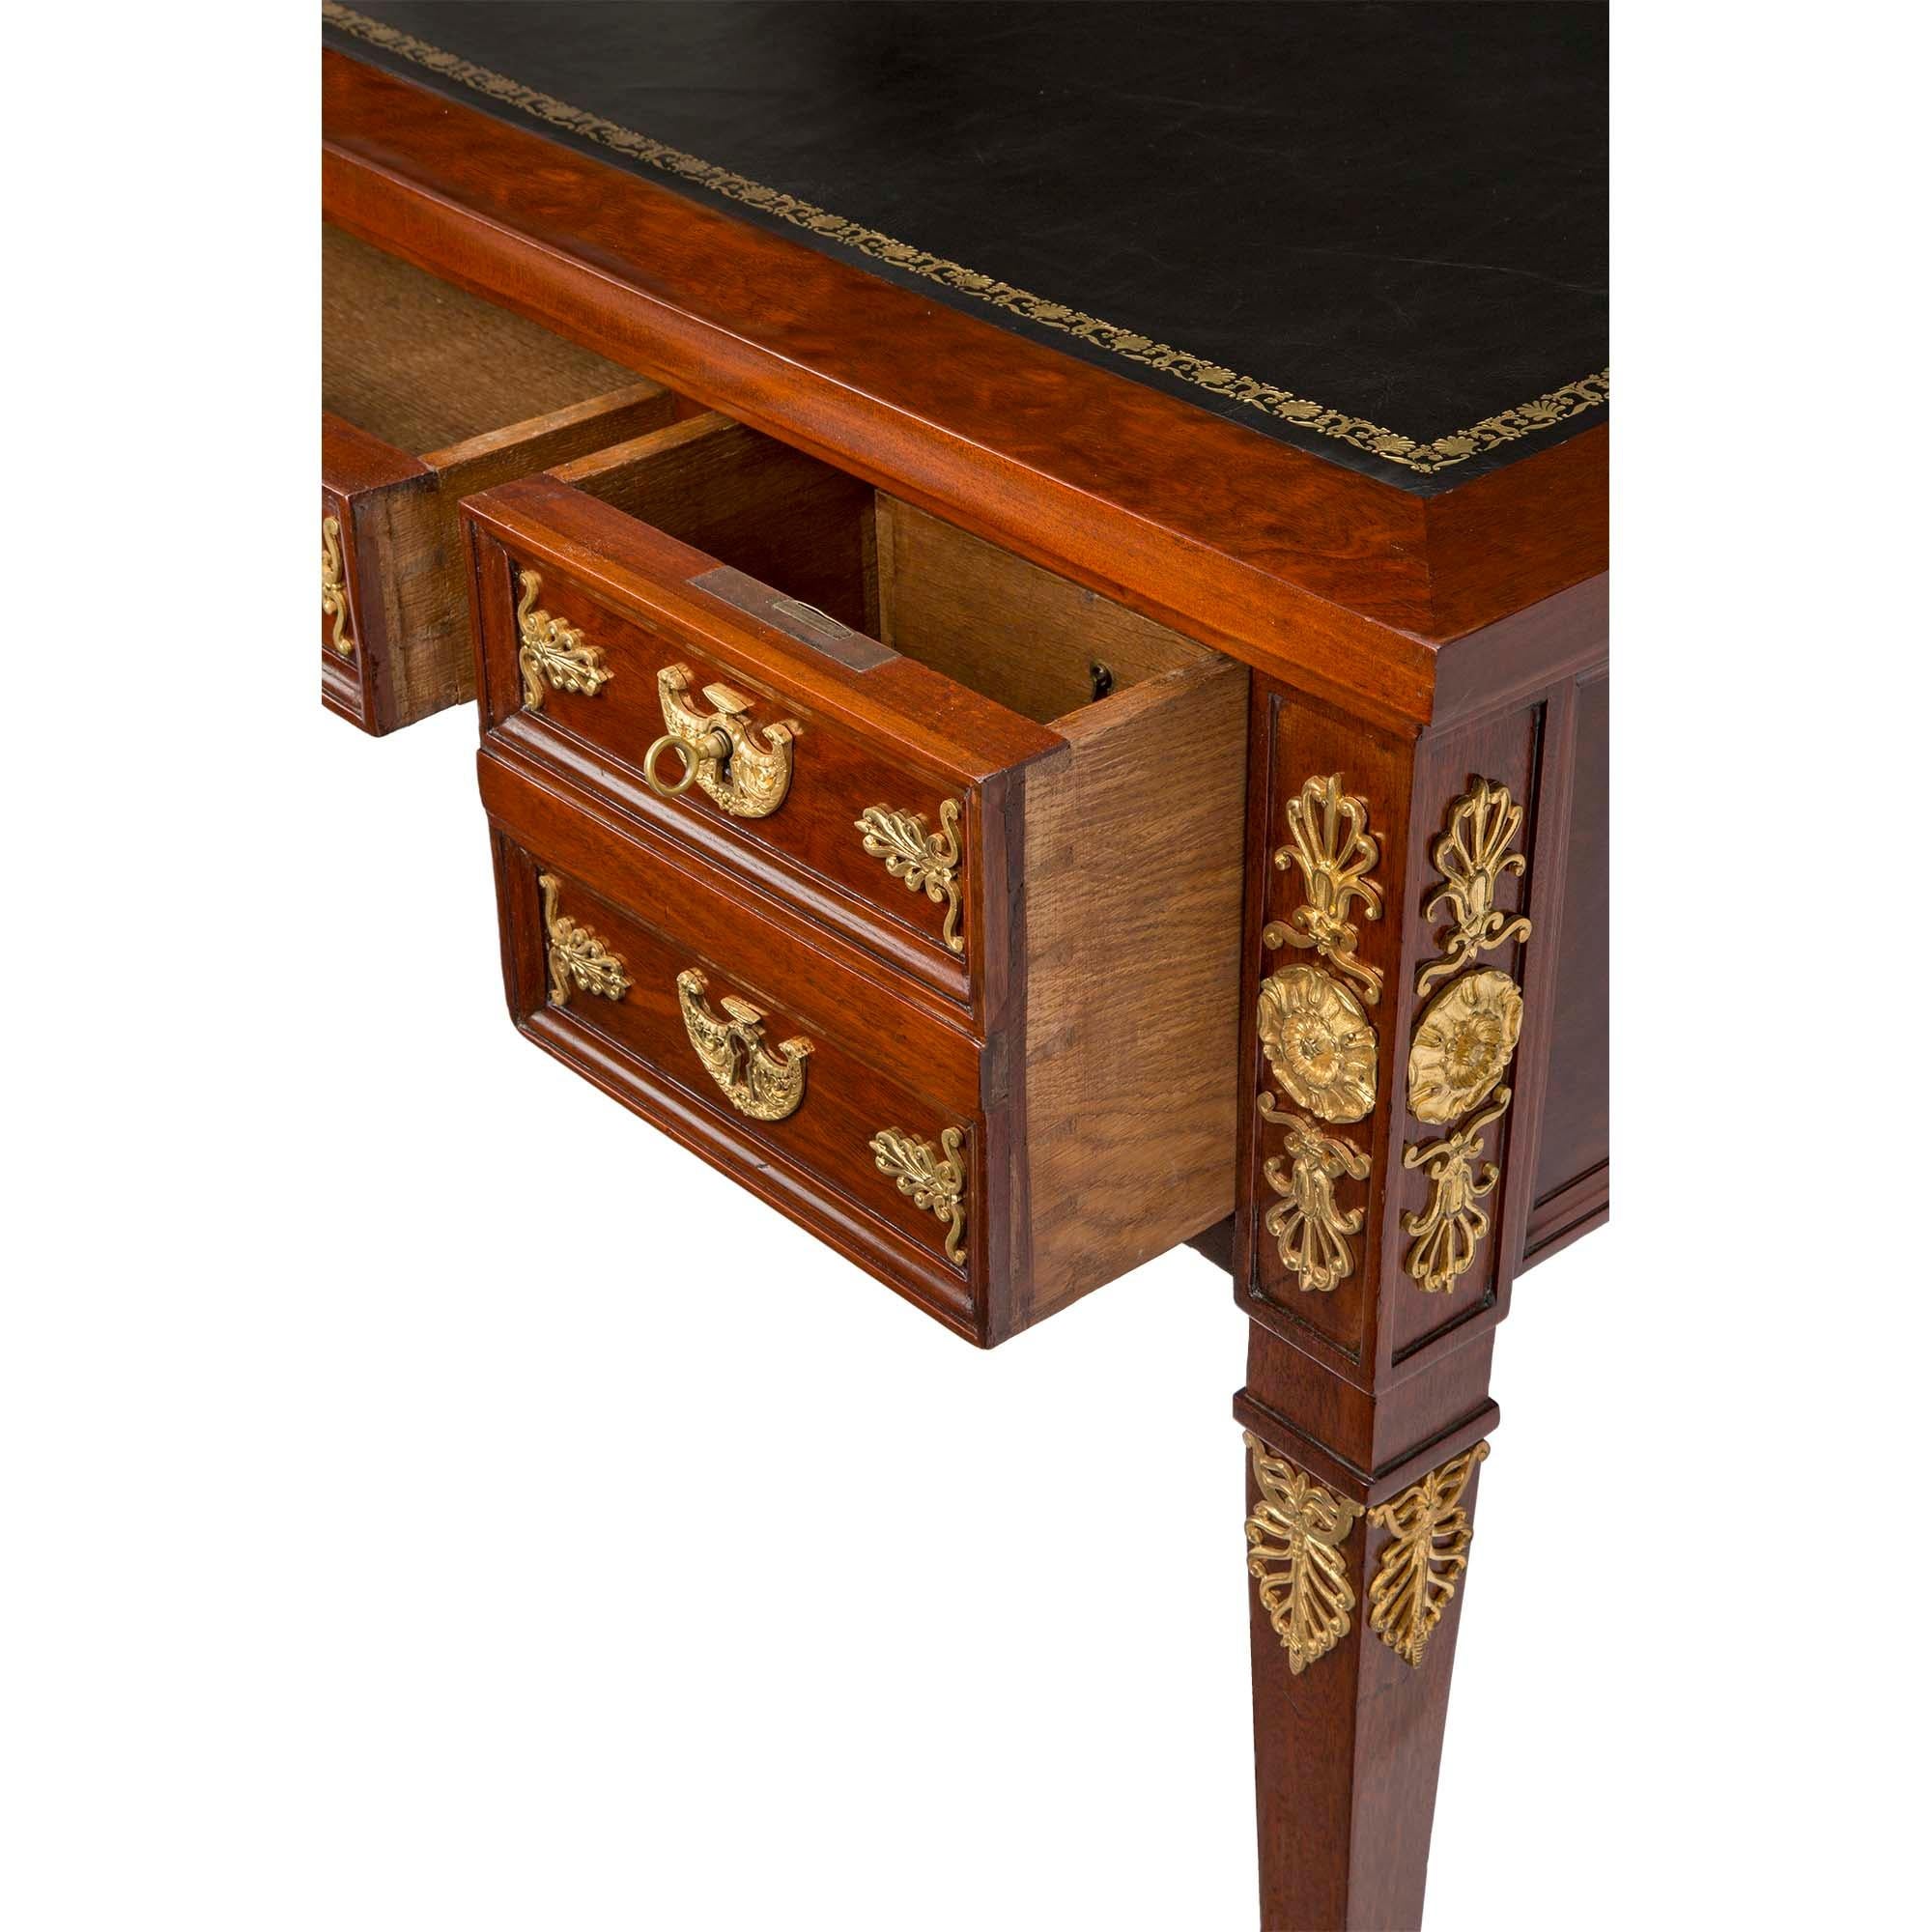 French 19th Century Empire Style Mahogany and Ormolu Bureau Plat For Sale 5